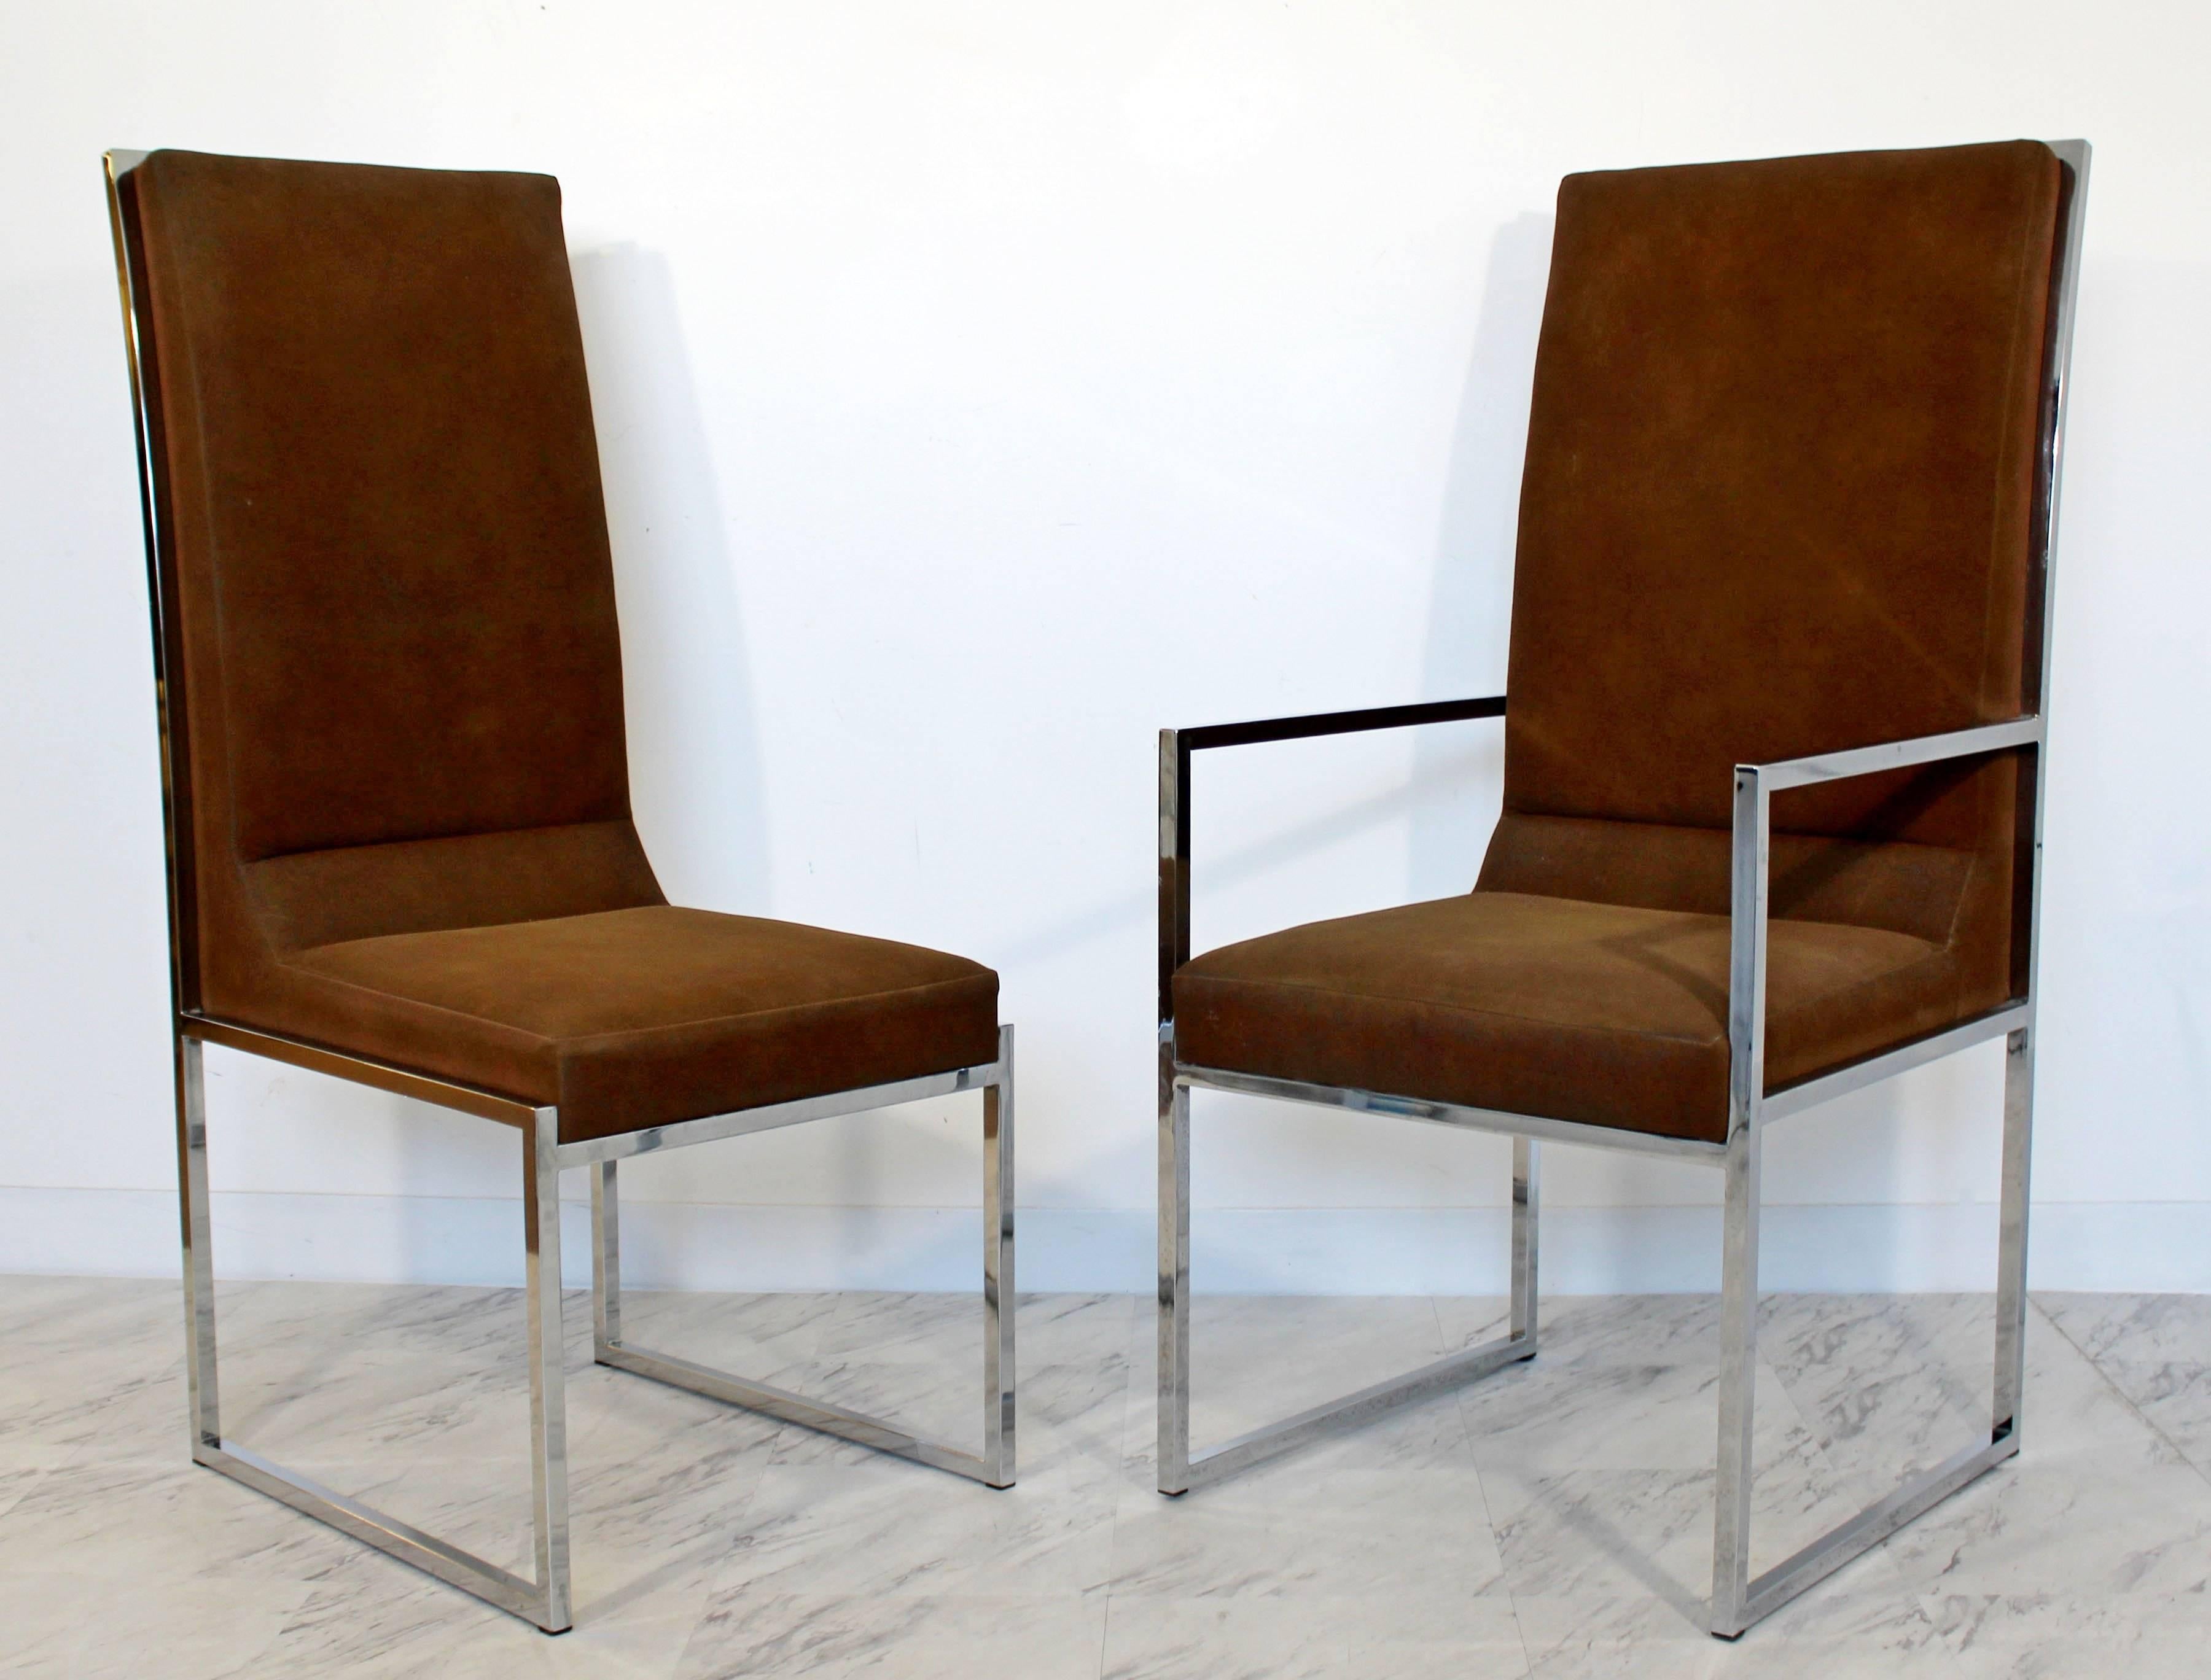 American Mid-Century Modern Milo Baughman for DIA Set of Six Chrome Dining Chairs, 1970s